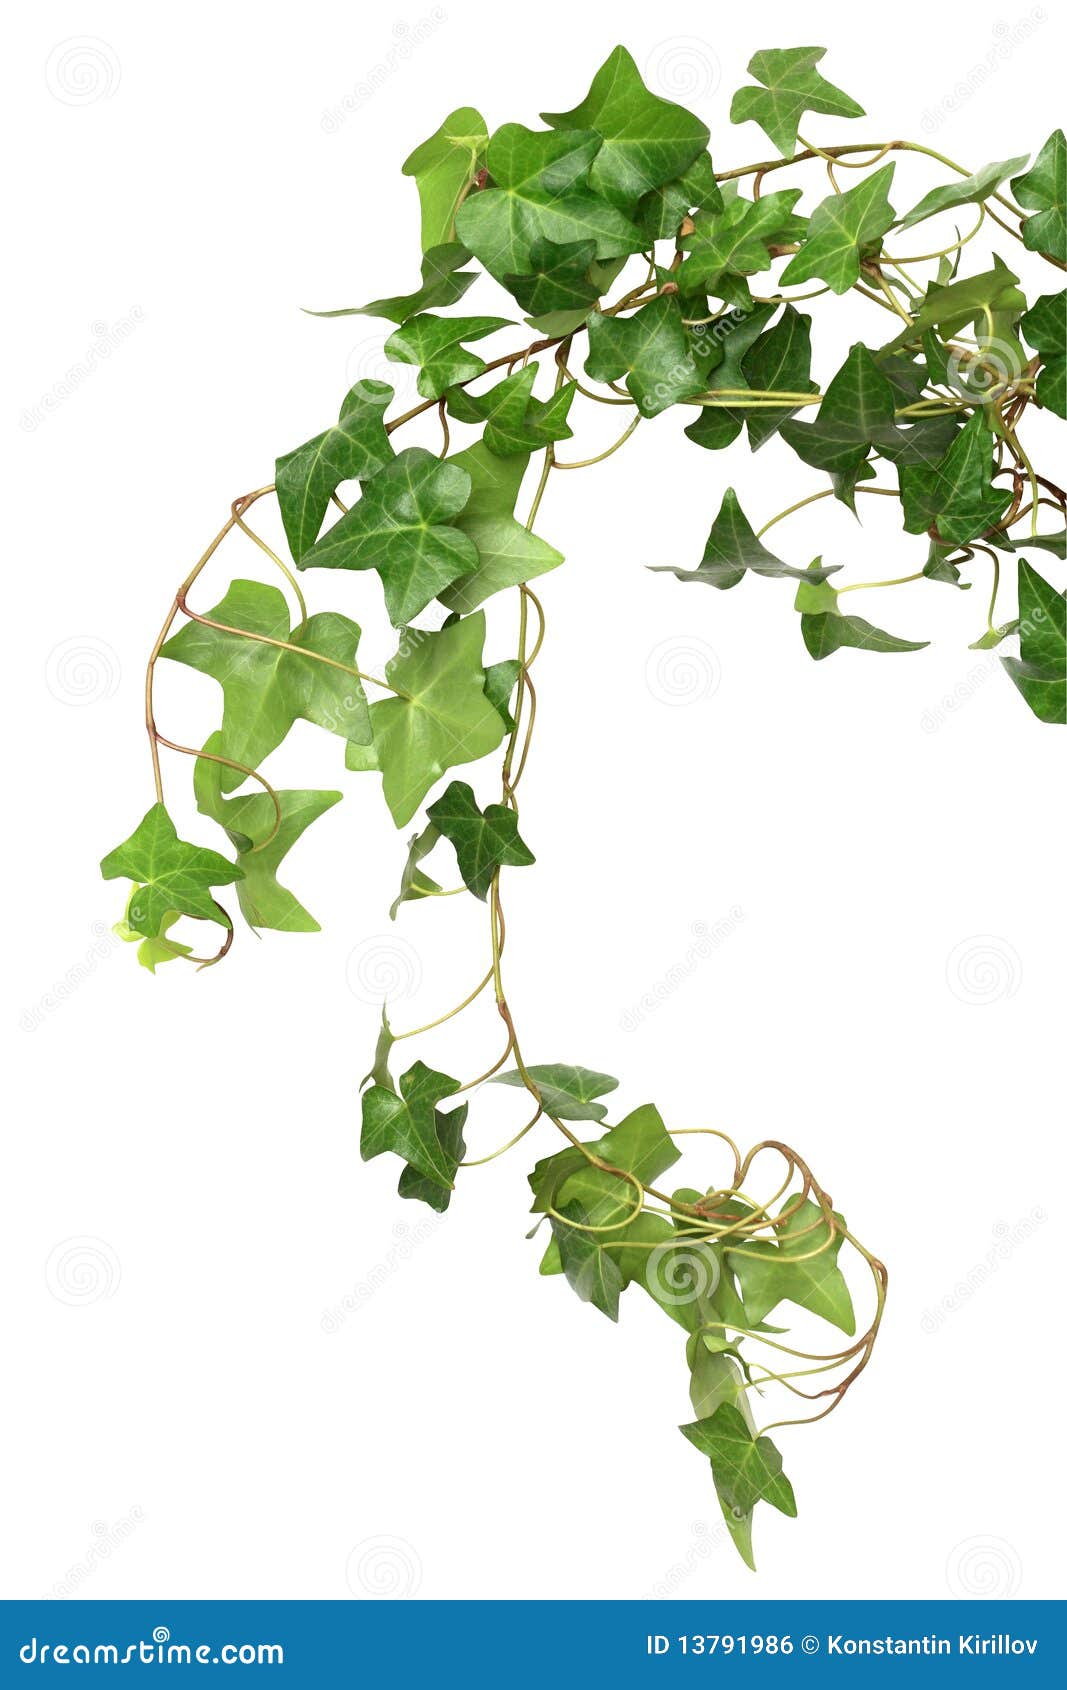 Green Ivy stock photo. Image of gardening, home, green - 13791986